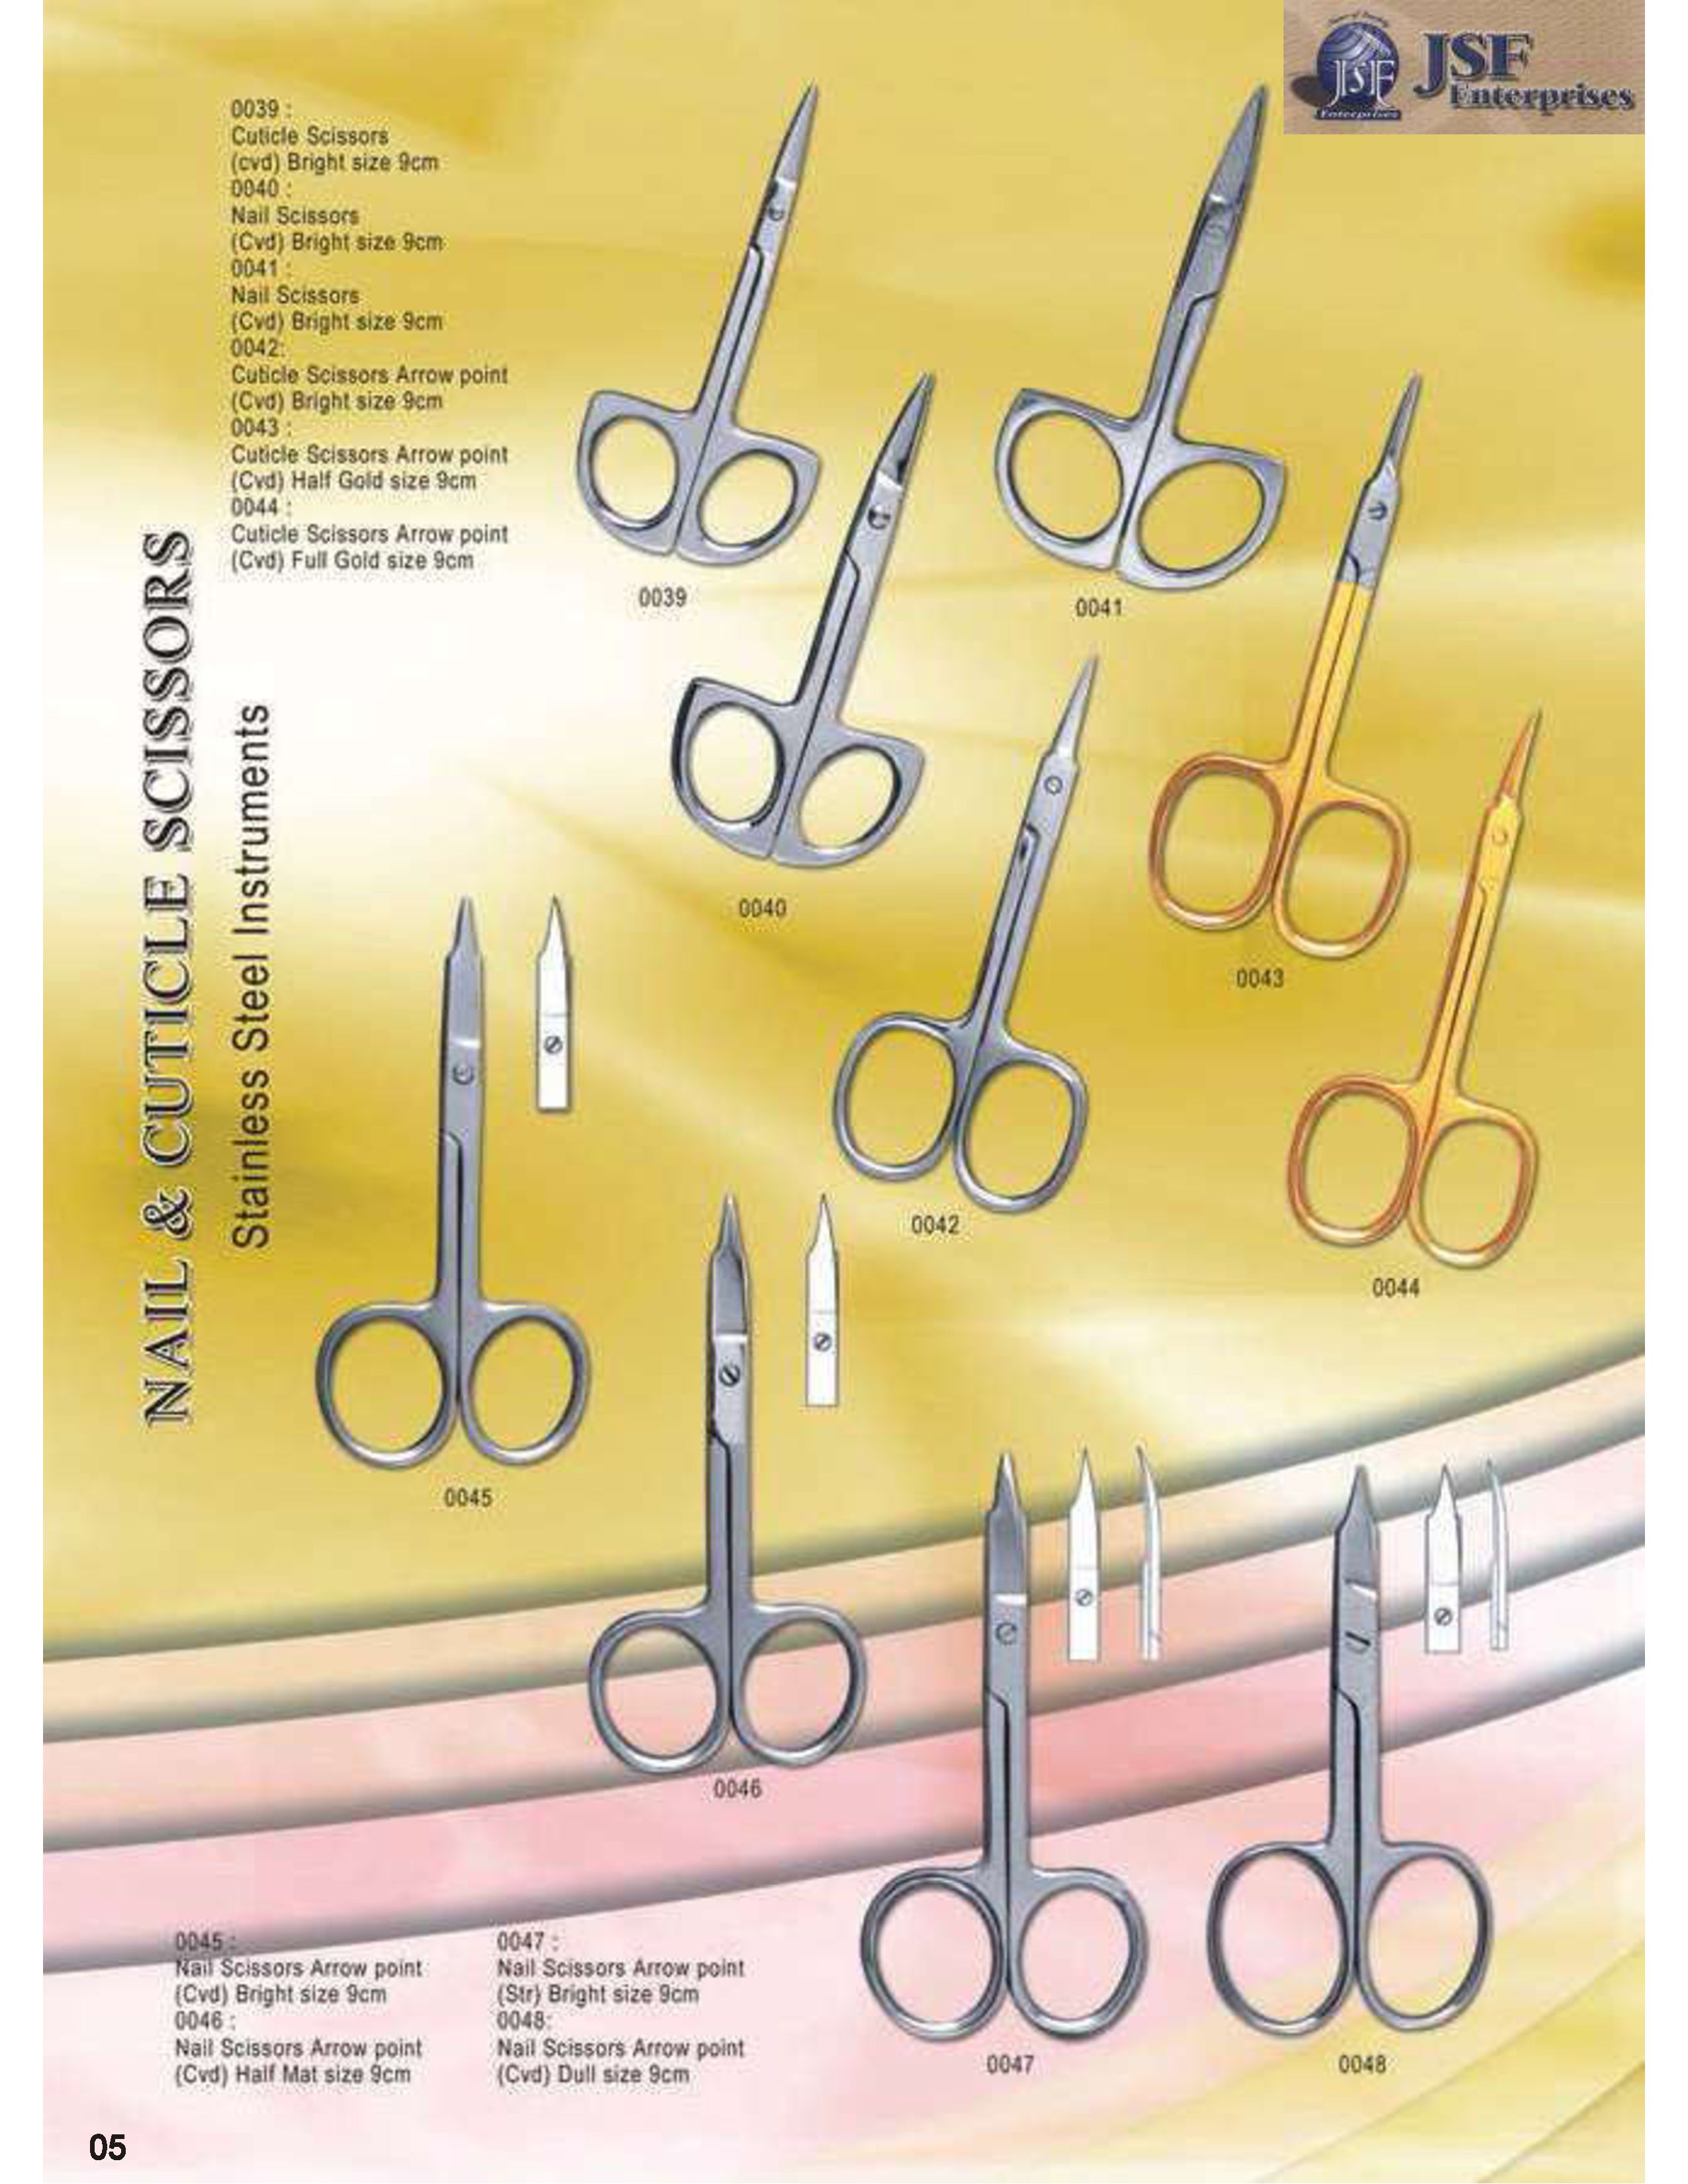 Stainless steel instruments